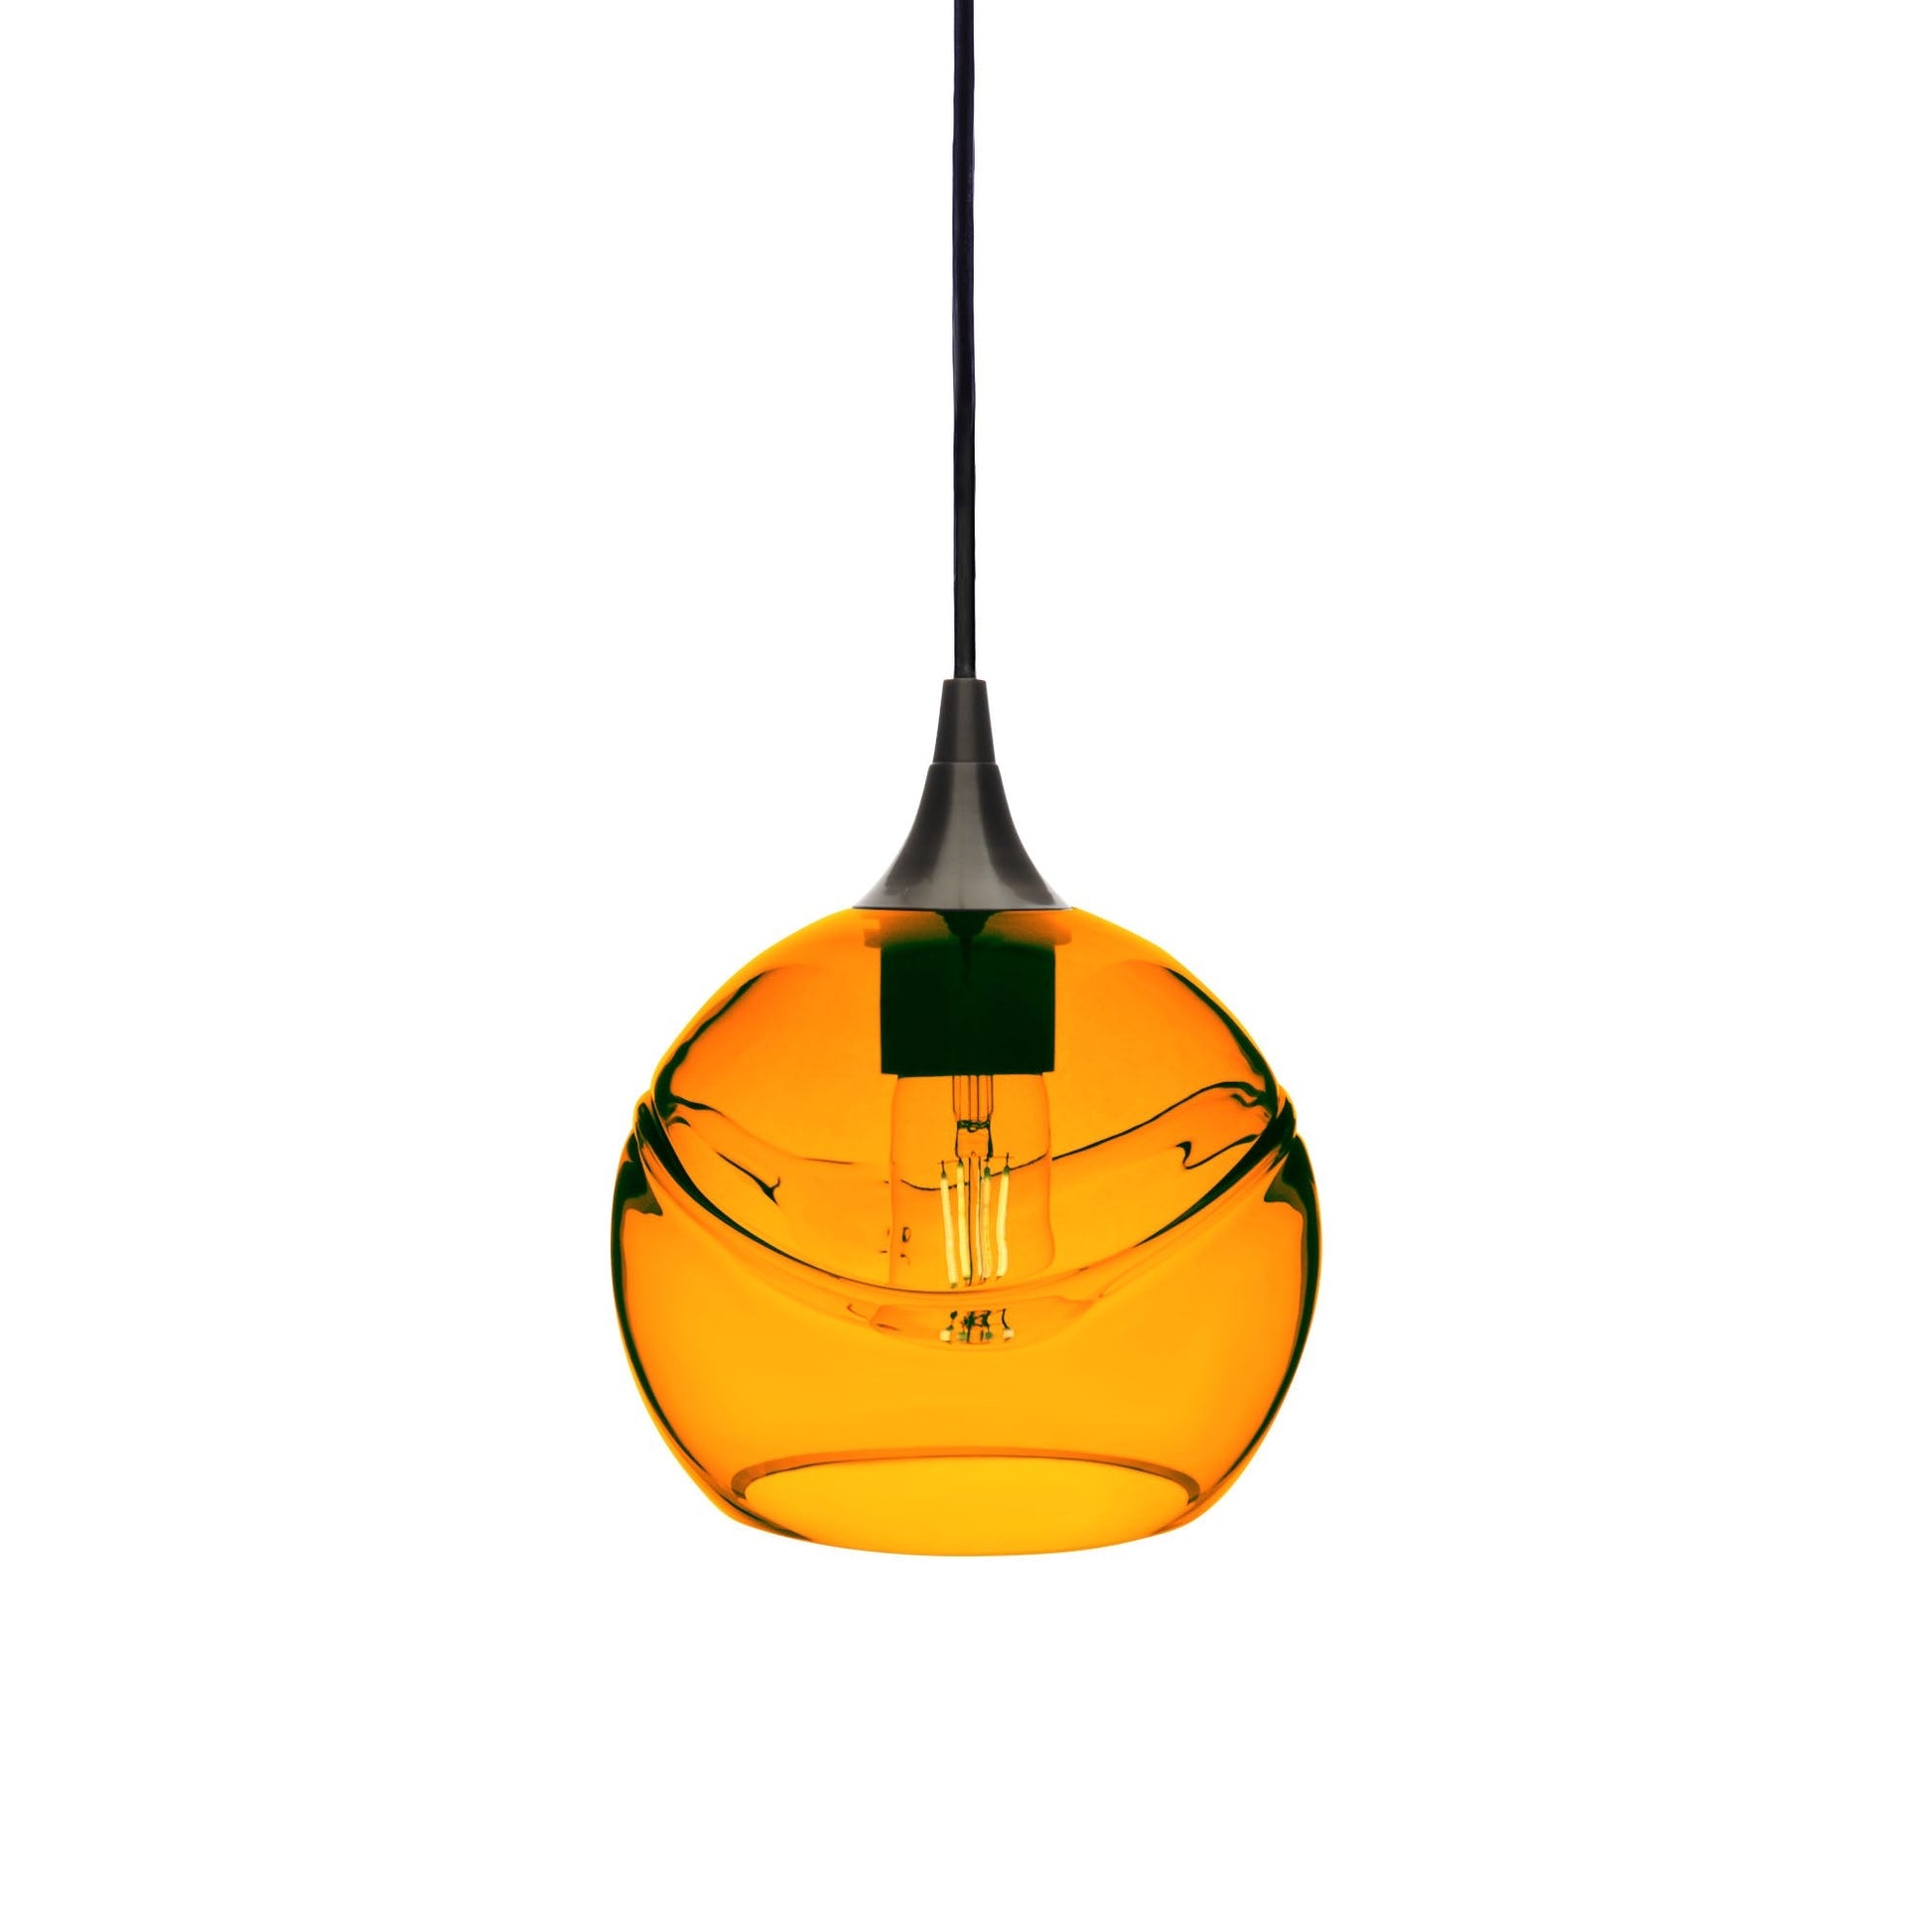 767 Swell: Single Pendant Light-Glass-Bicycle Glass Co - Hotshop-Harvest Gold-Antique Bronze-Bicycle Glass Co